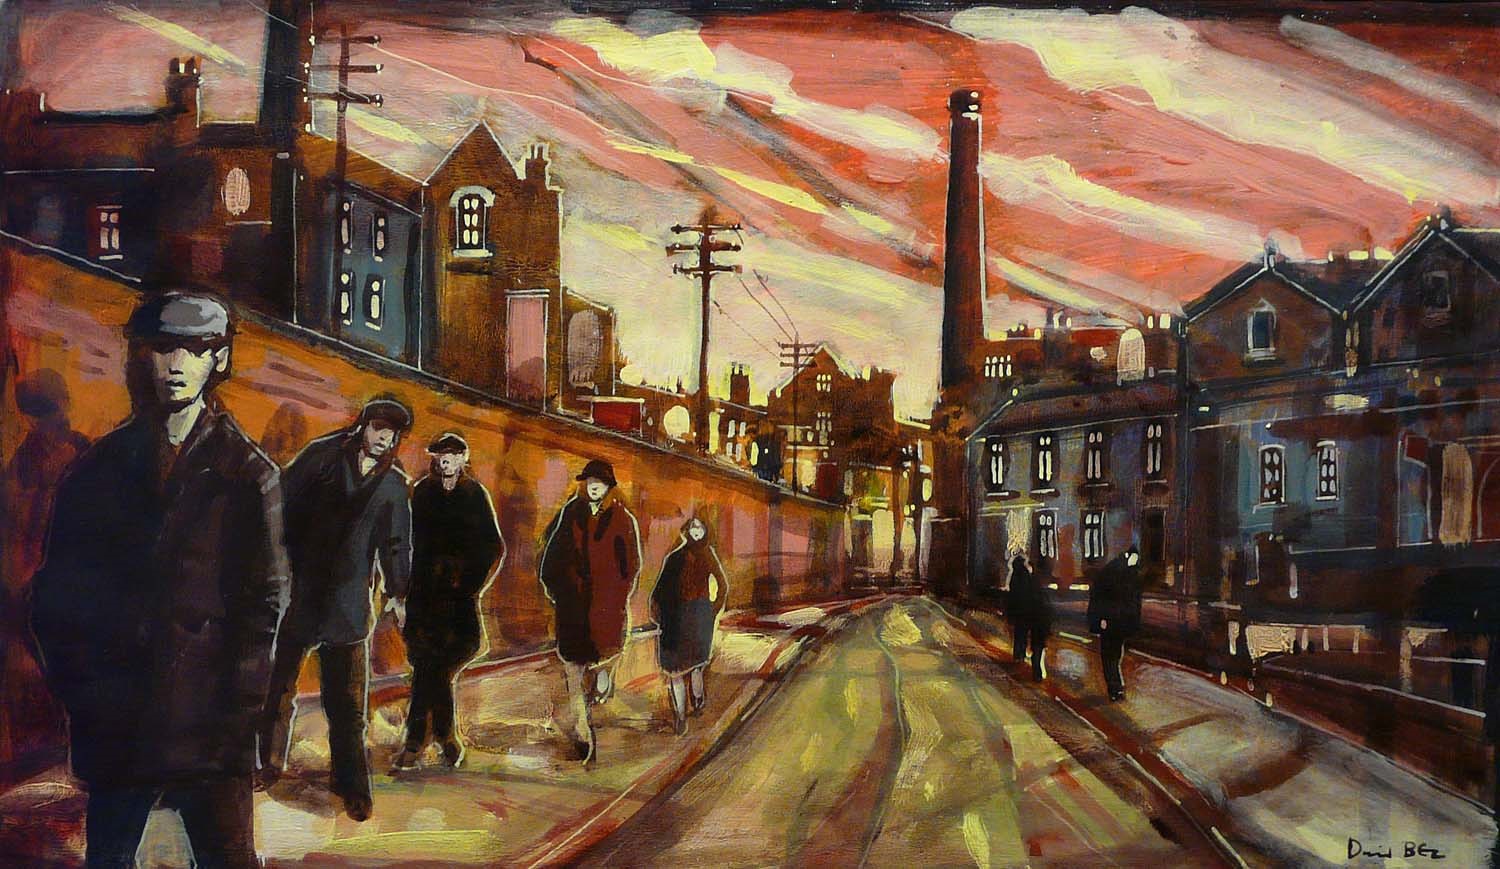 Streets of Gold by David Bez, Northern | Landscape